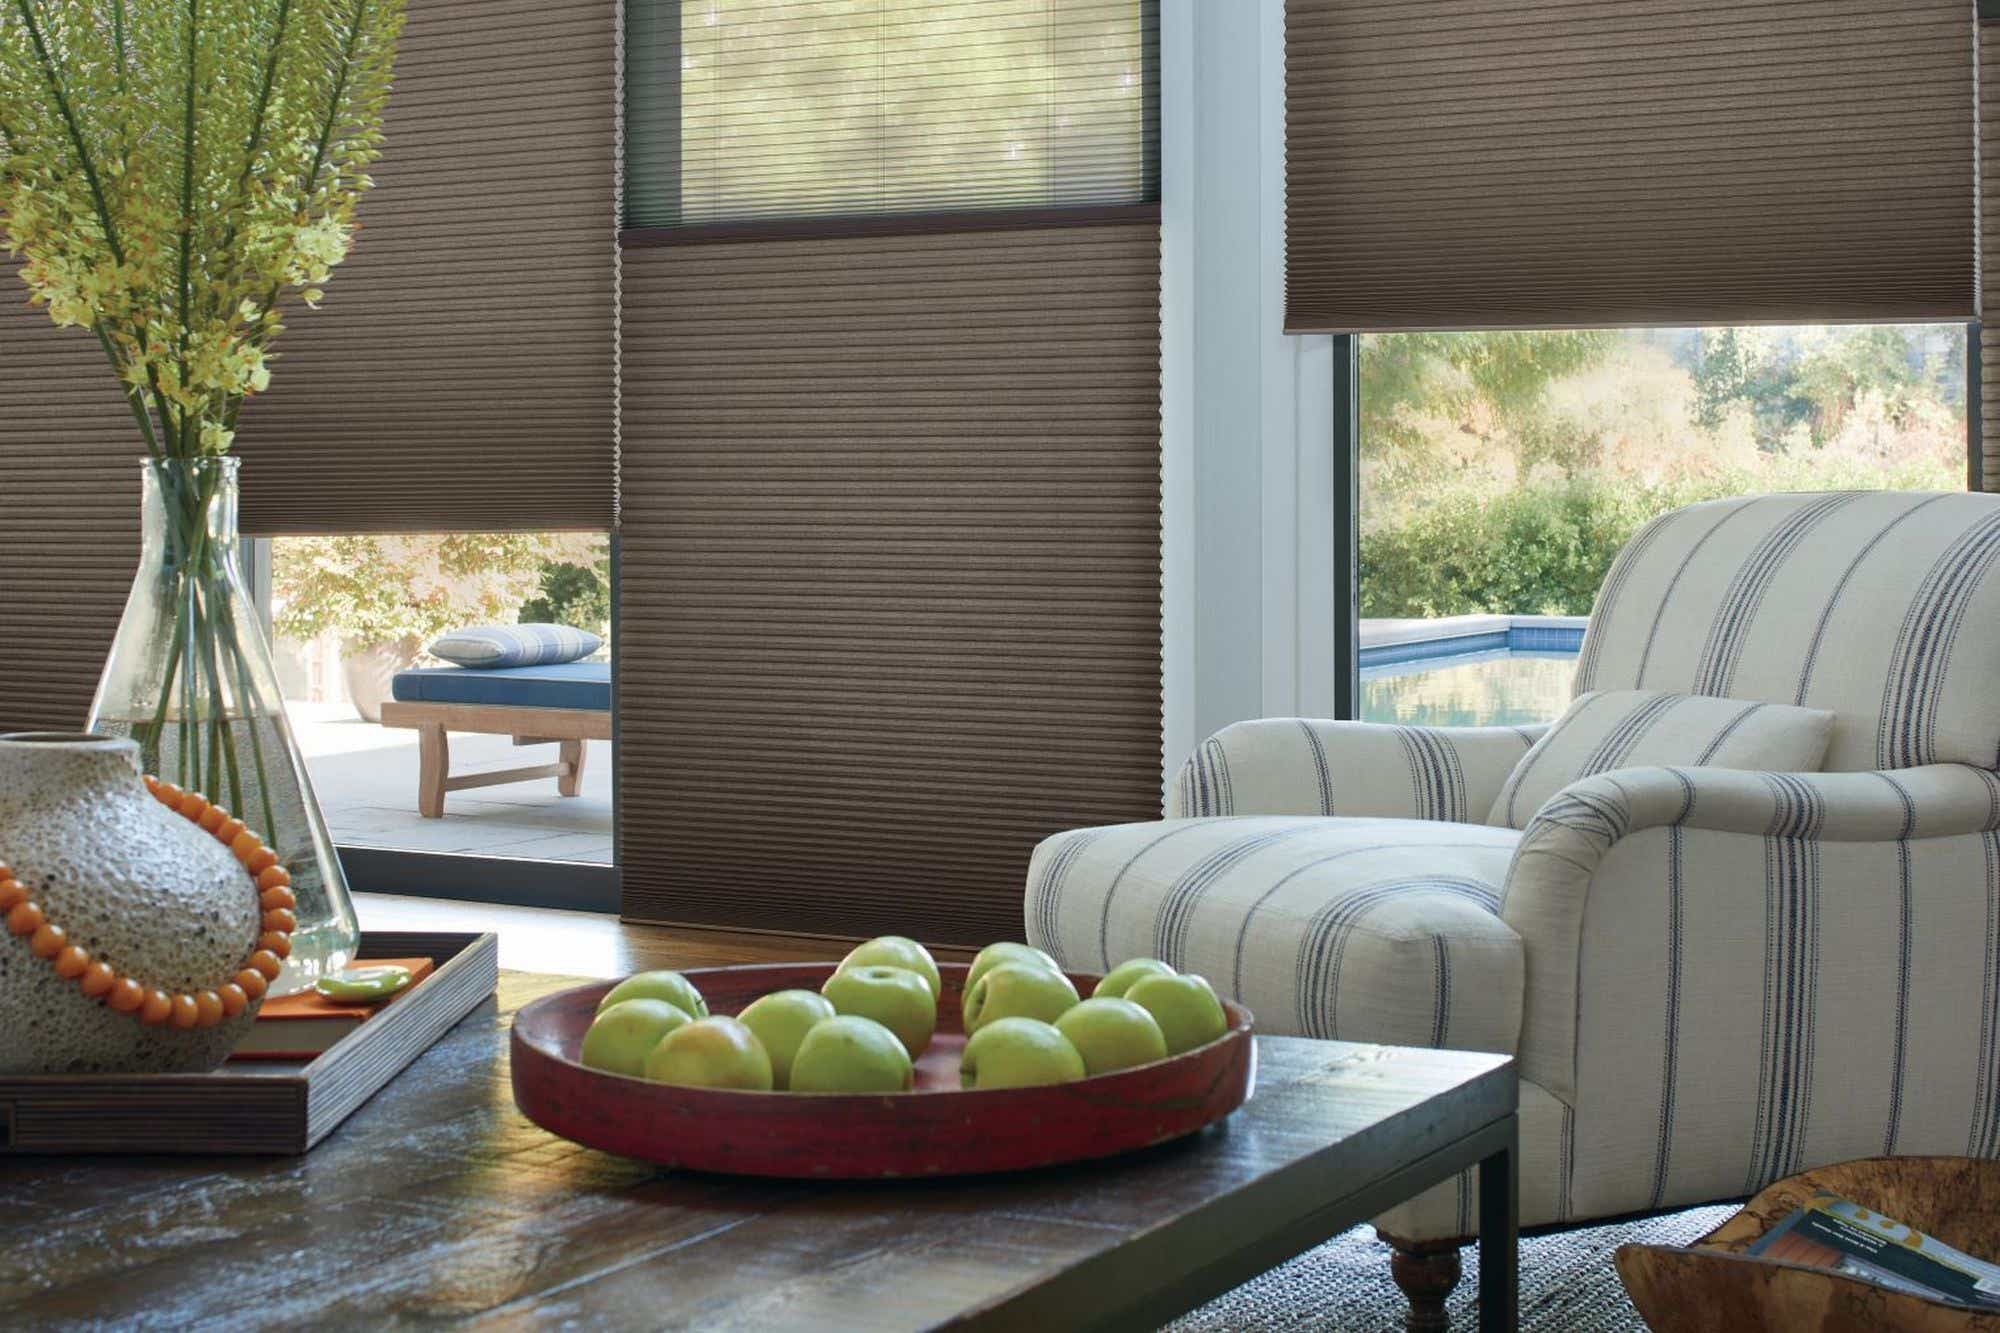 Hunter Douglas Duette shade with PowerView Automation